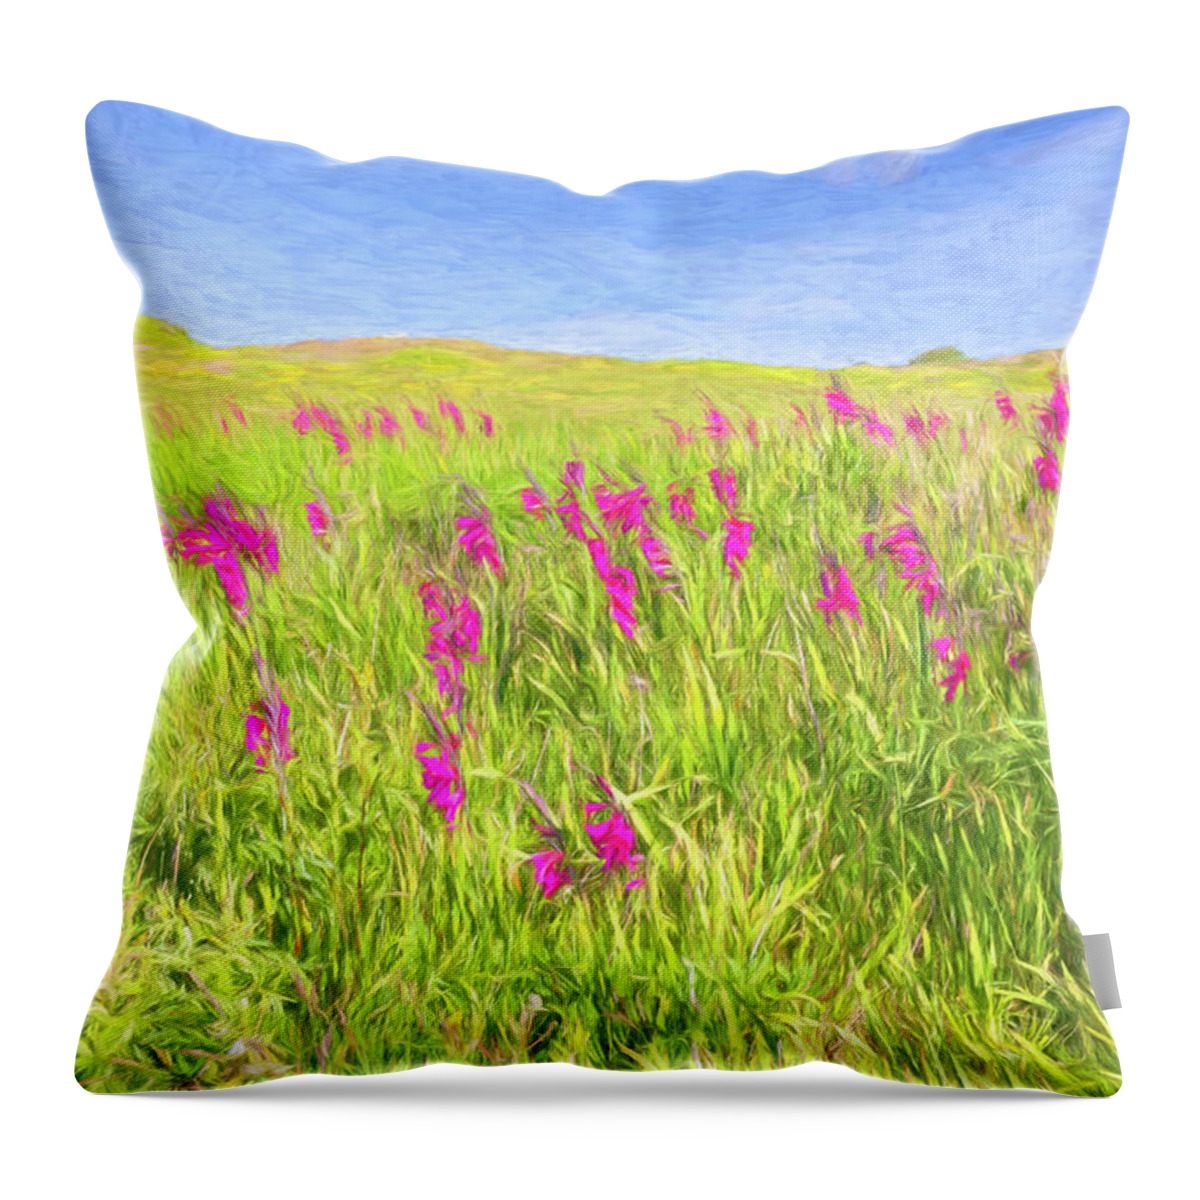 Gladiolus Throw Pillow featuring the digital art Field Of Gladiolus Painterly by Tanya C Smith